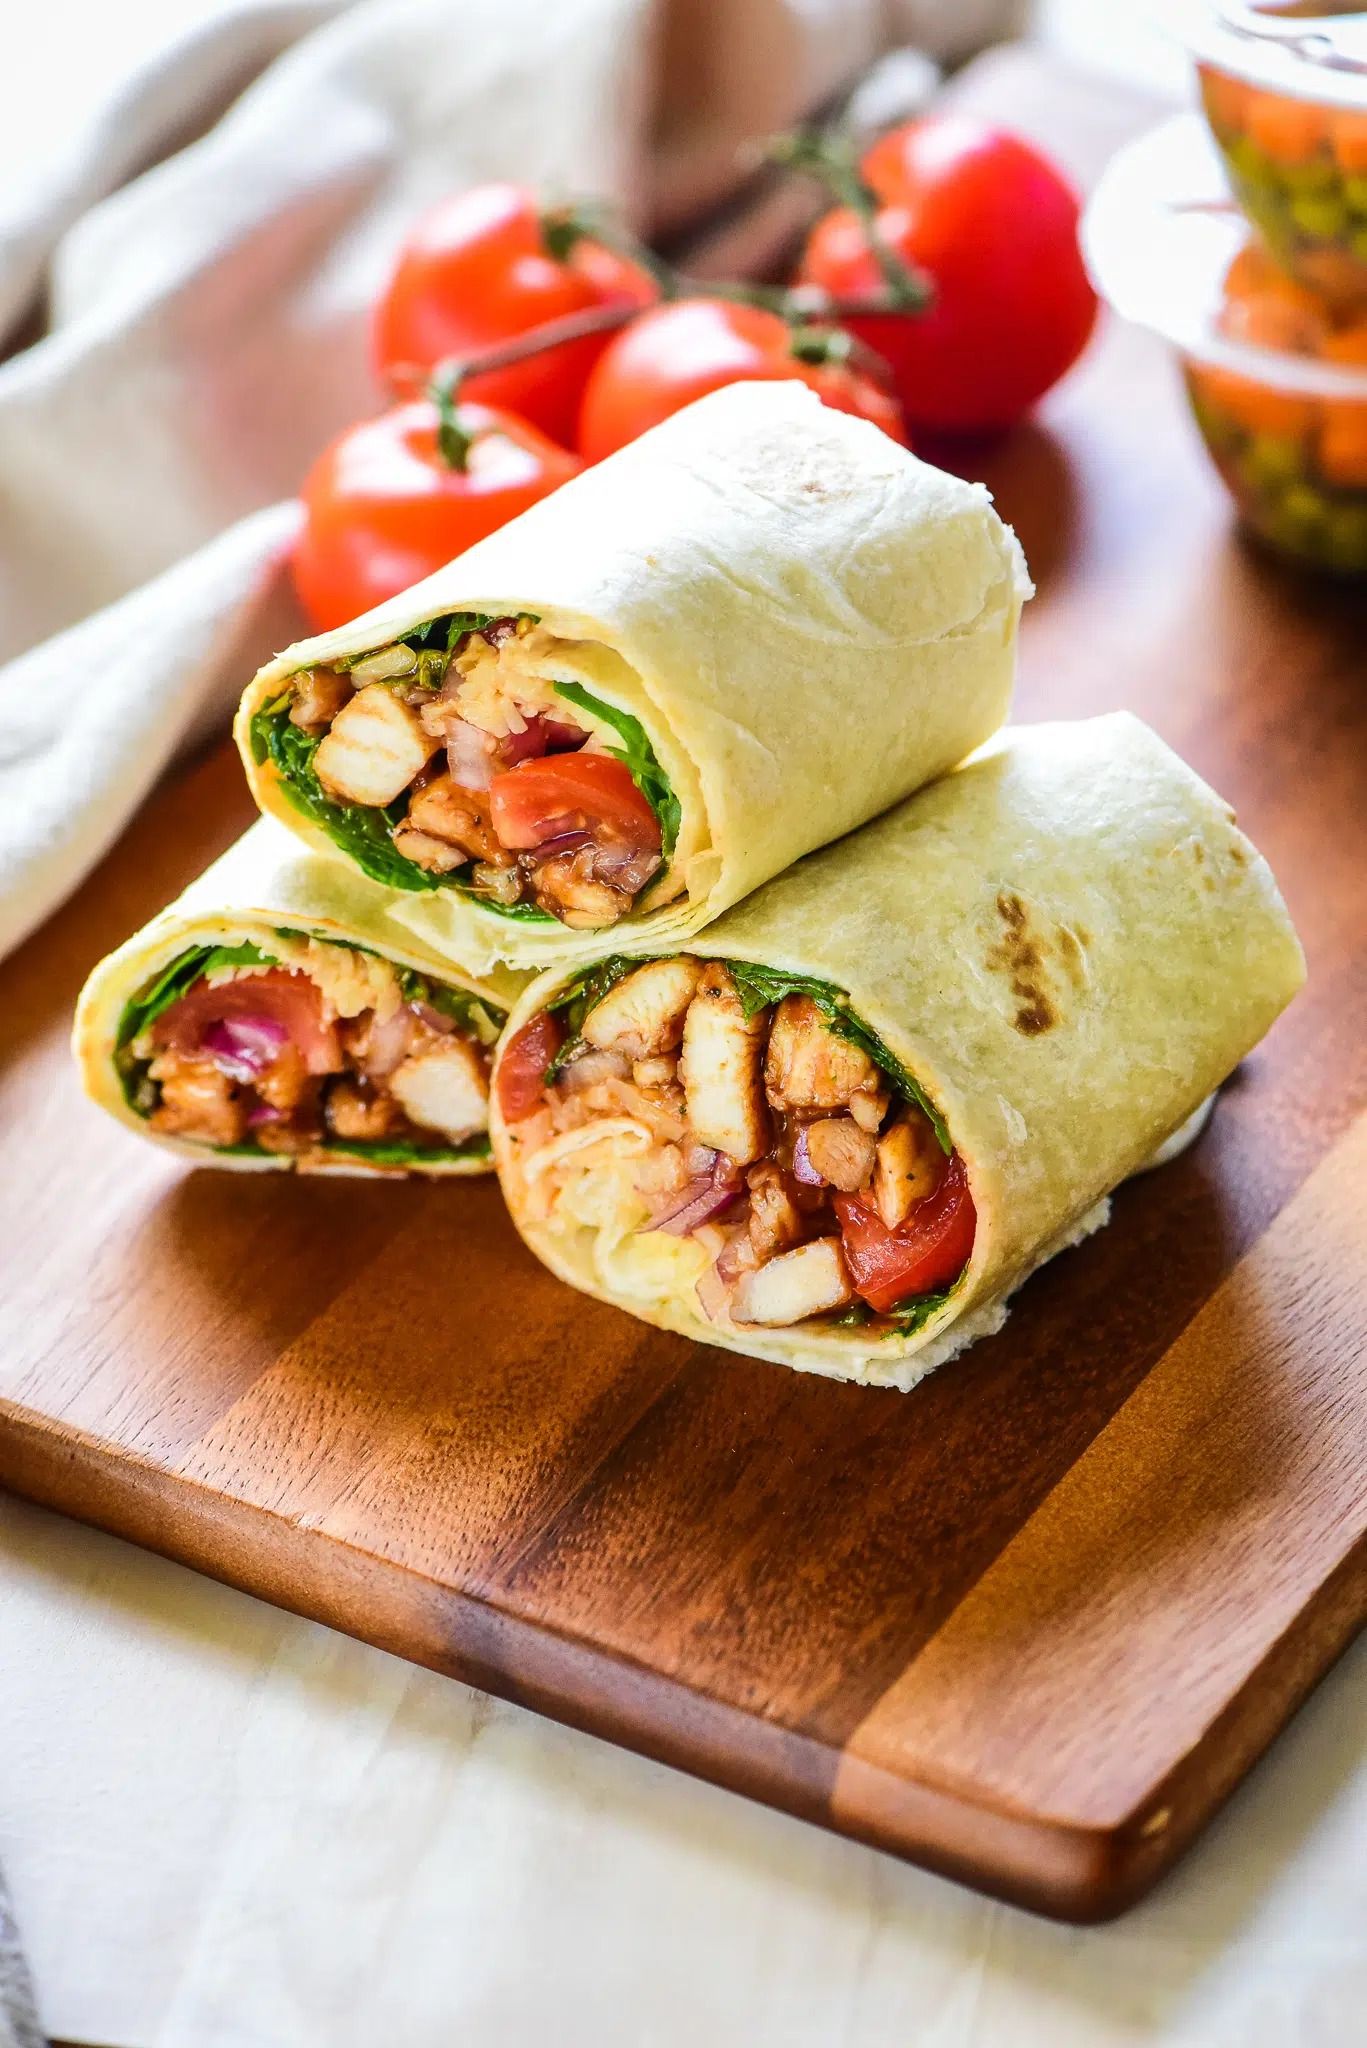 15 Easy Chicken Wrap Recipes for a Quick, Grab-and-Go Lunch